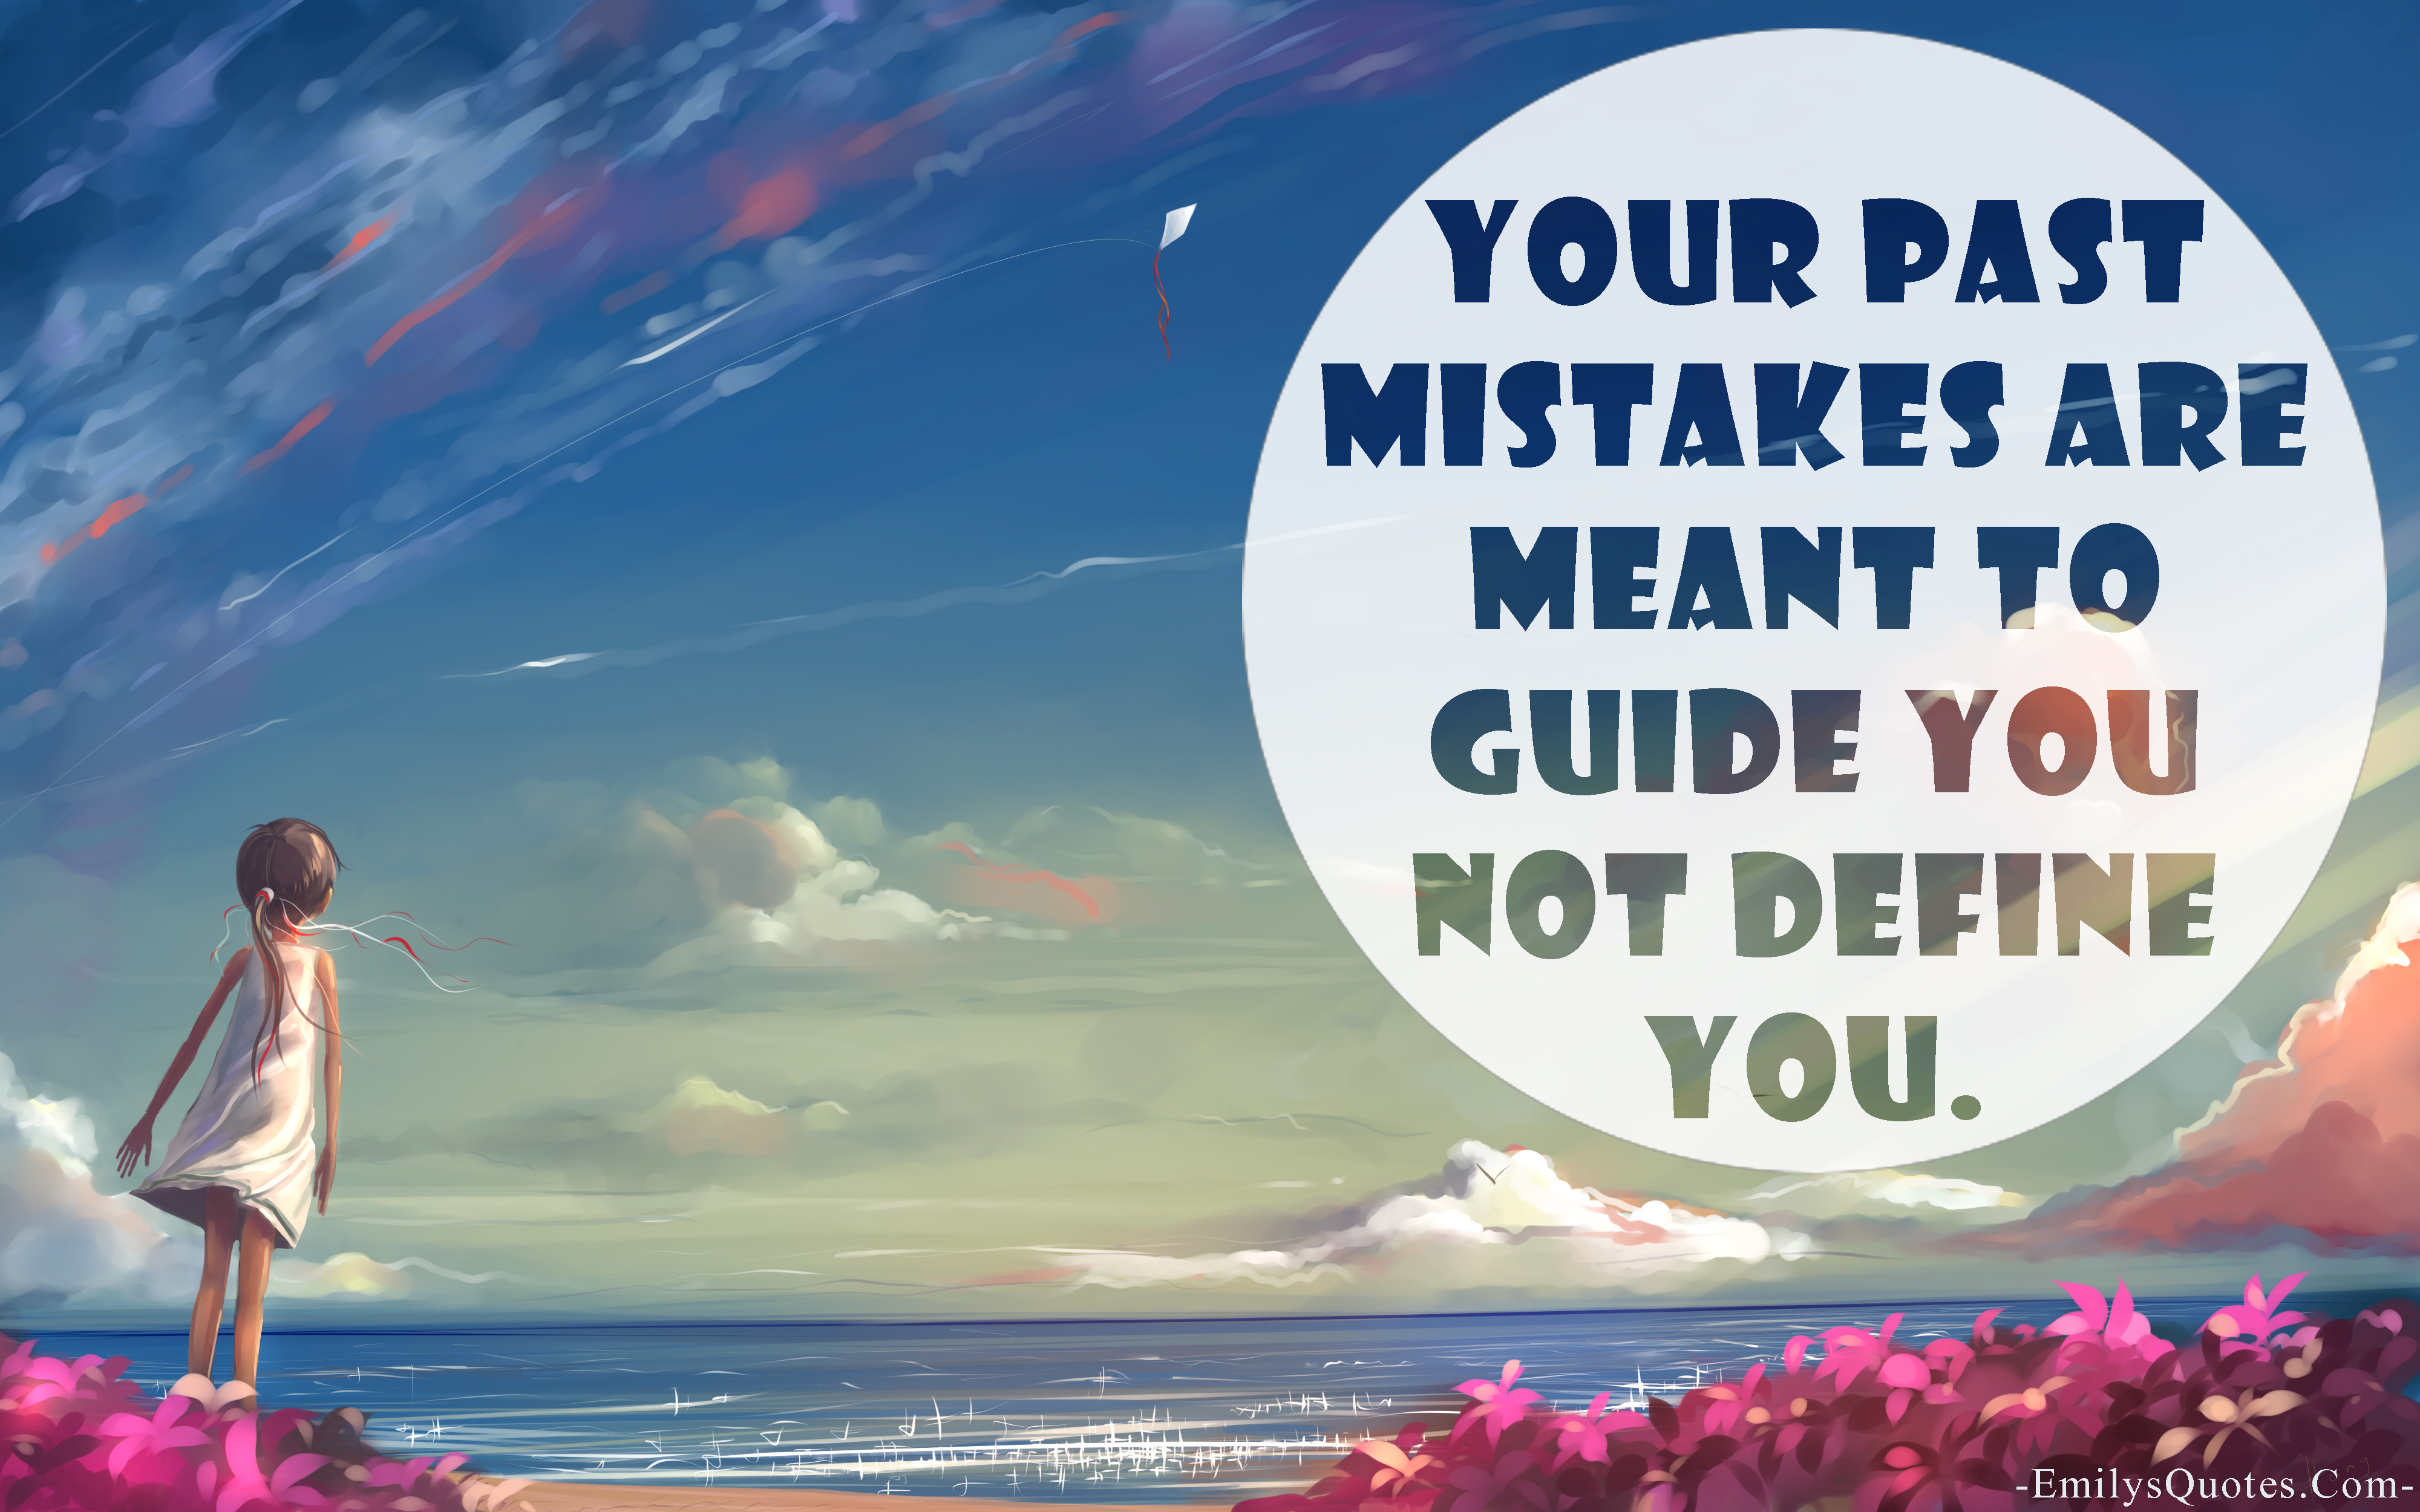 Your past mistakes are meant to guide you not define you